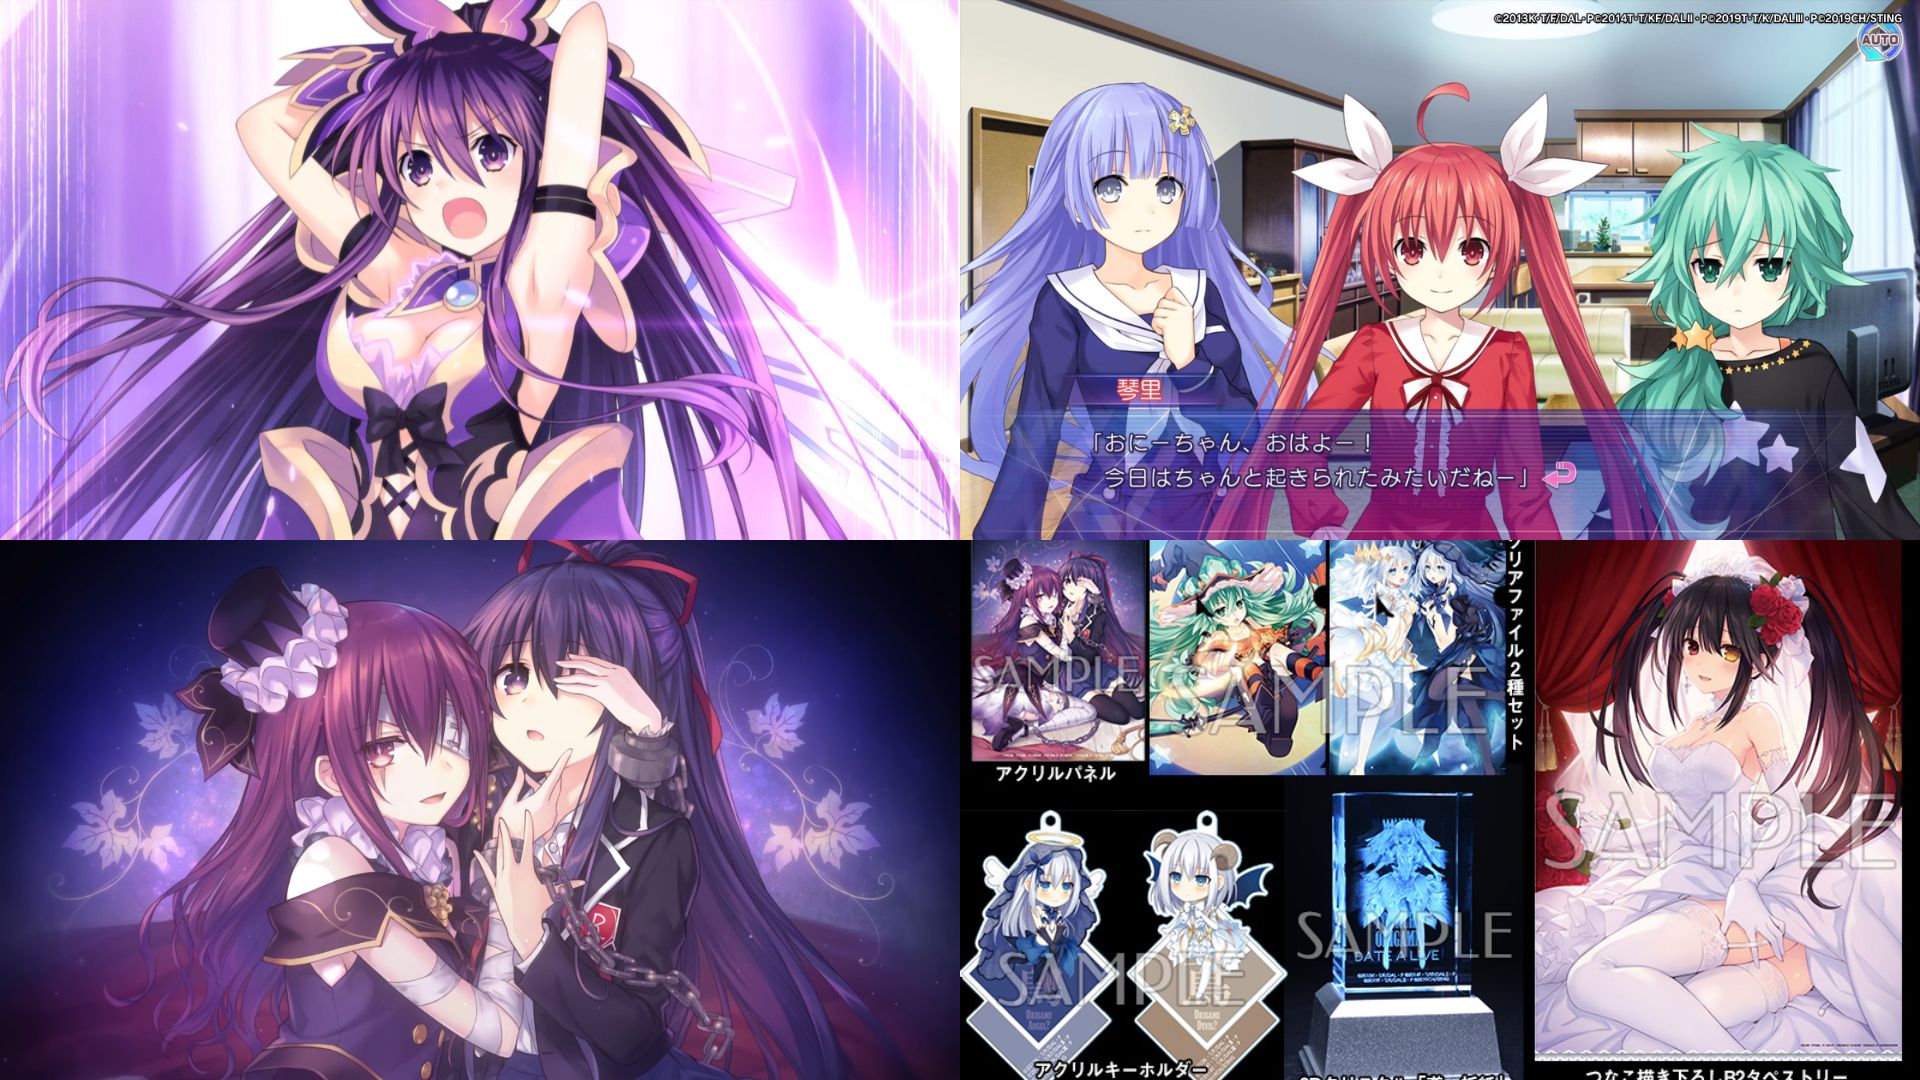 Date A Live Ren Dystopia Showcases Its Heroines, Opening